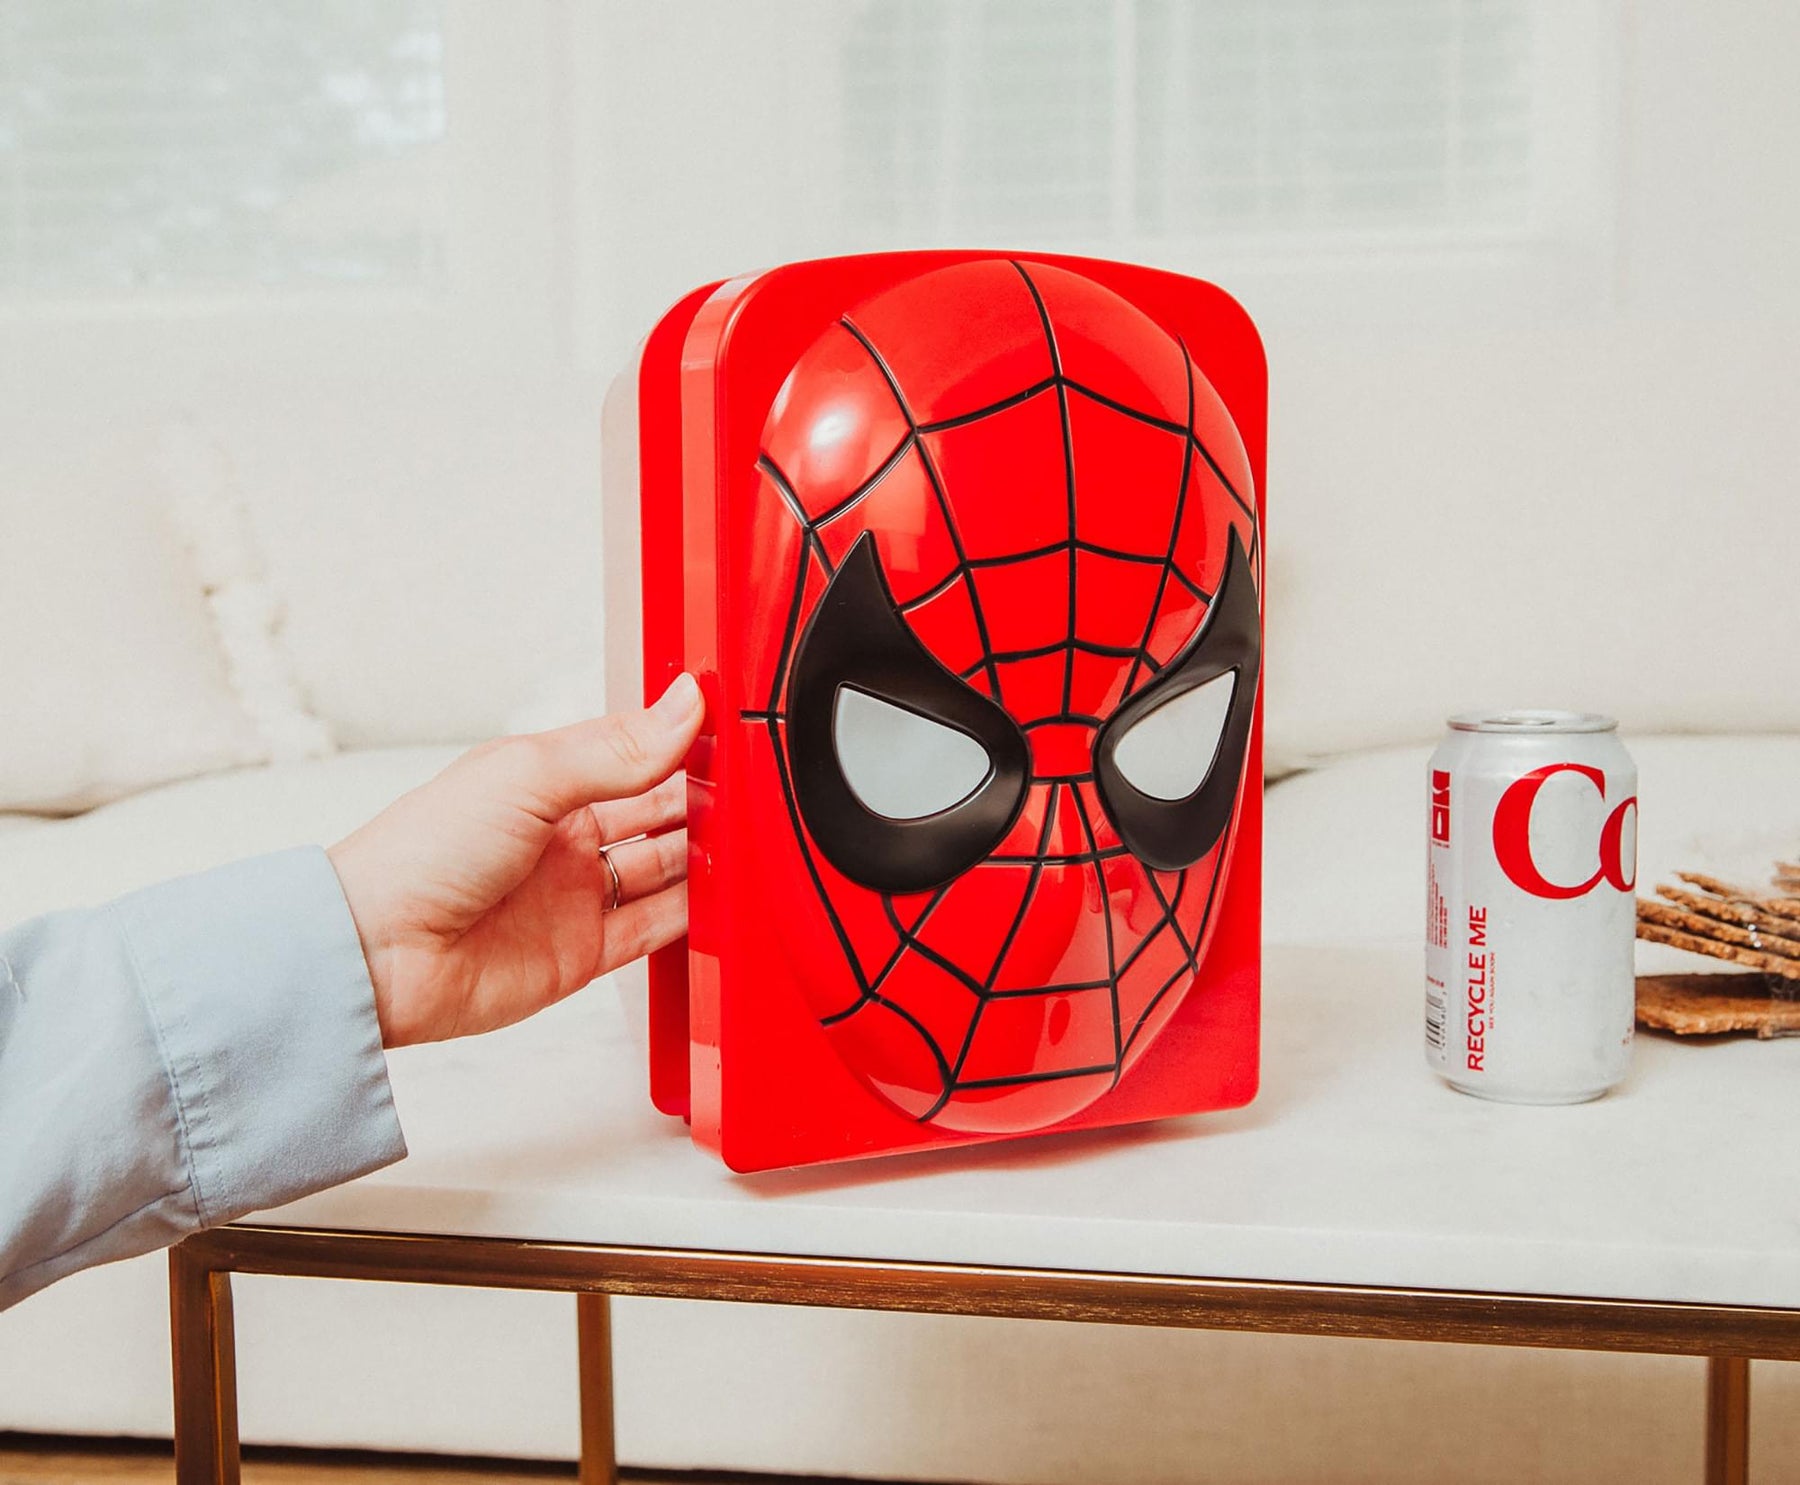 Marvel Spider-Man 4-Liter Mini Fridge Thermoelectric Cooler | Holds 6 Cans